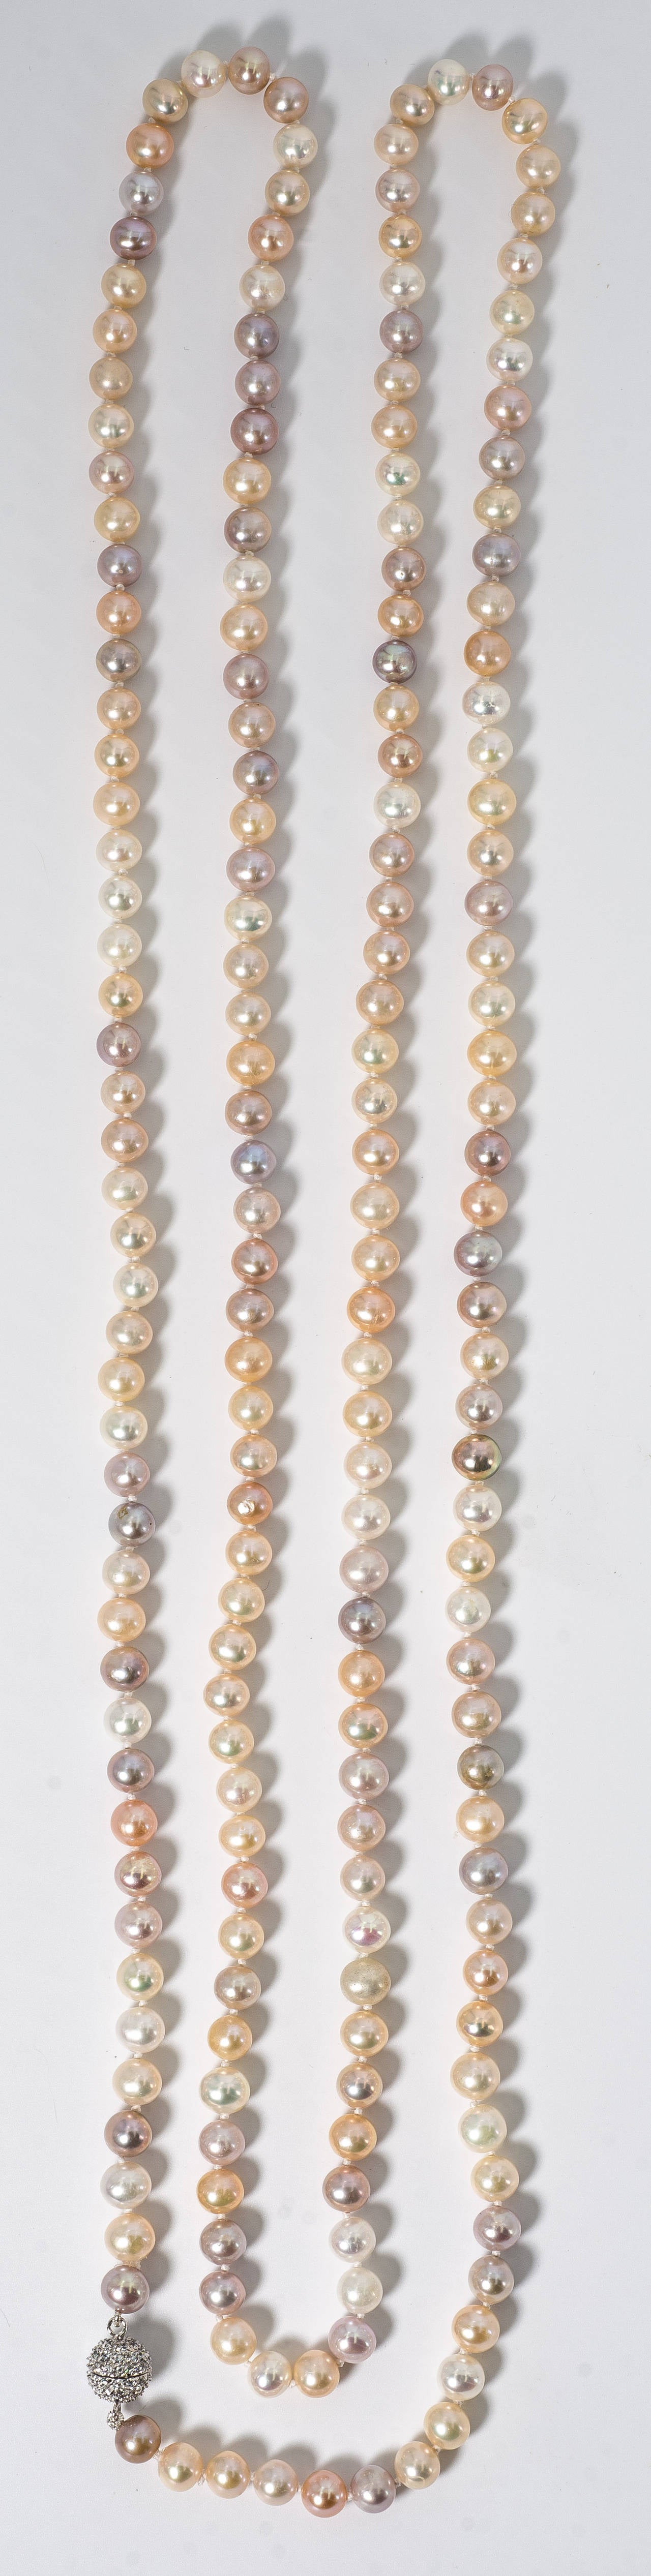 Sixty Inch long rope of multi-shaded 8mm real freshwater pearls hand knotted to a pave cubic zircon screw ball clasp. Can be easily wrapped around 4 times a neckline.